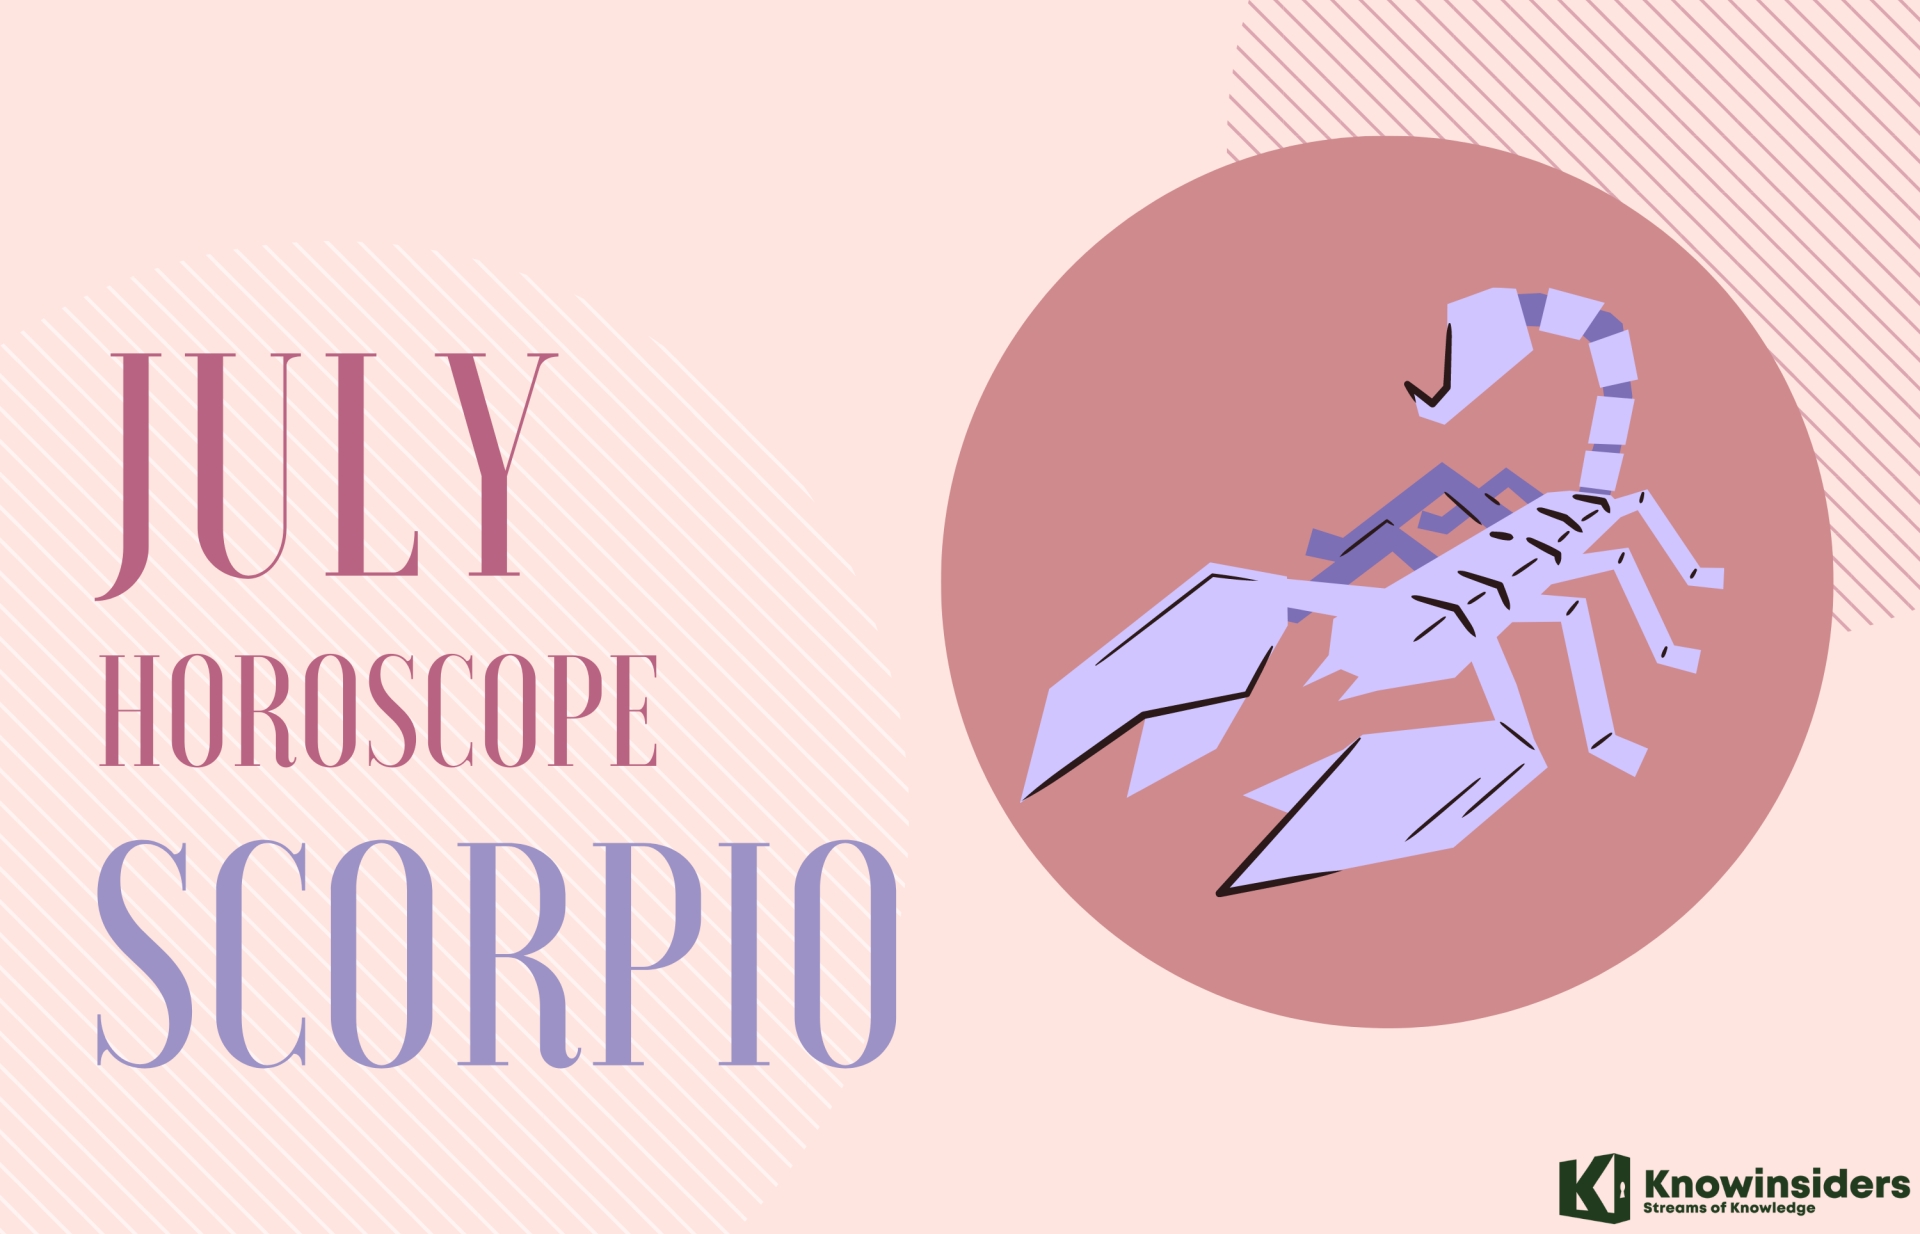 SCORPIO July 2022 Horoscope: Monthly Prediction for Love, Career, Money and Health